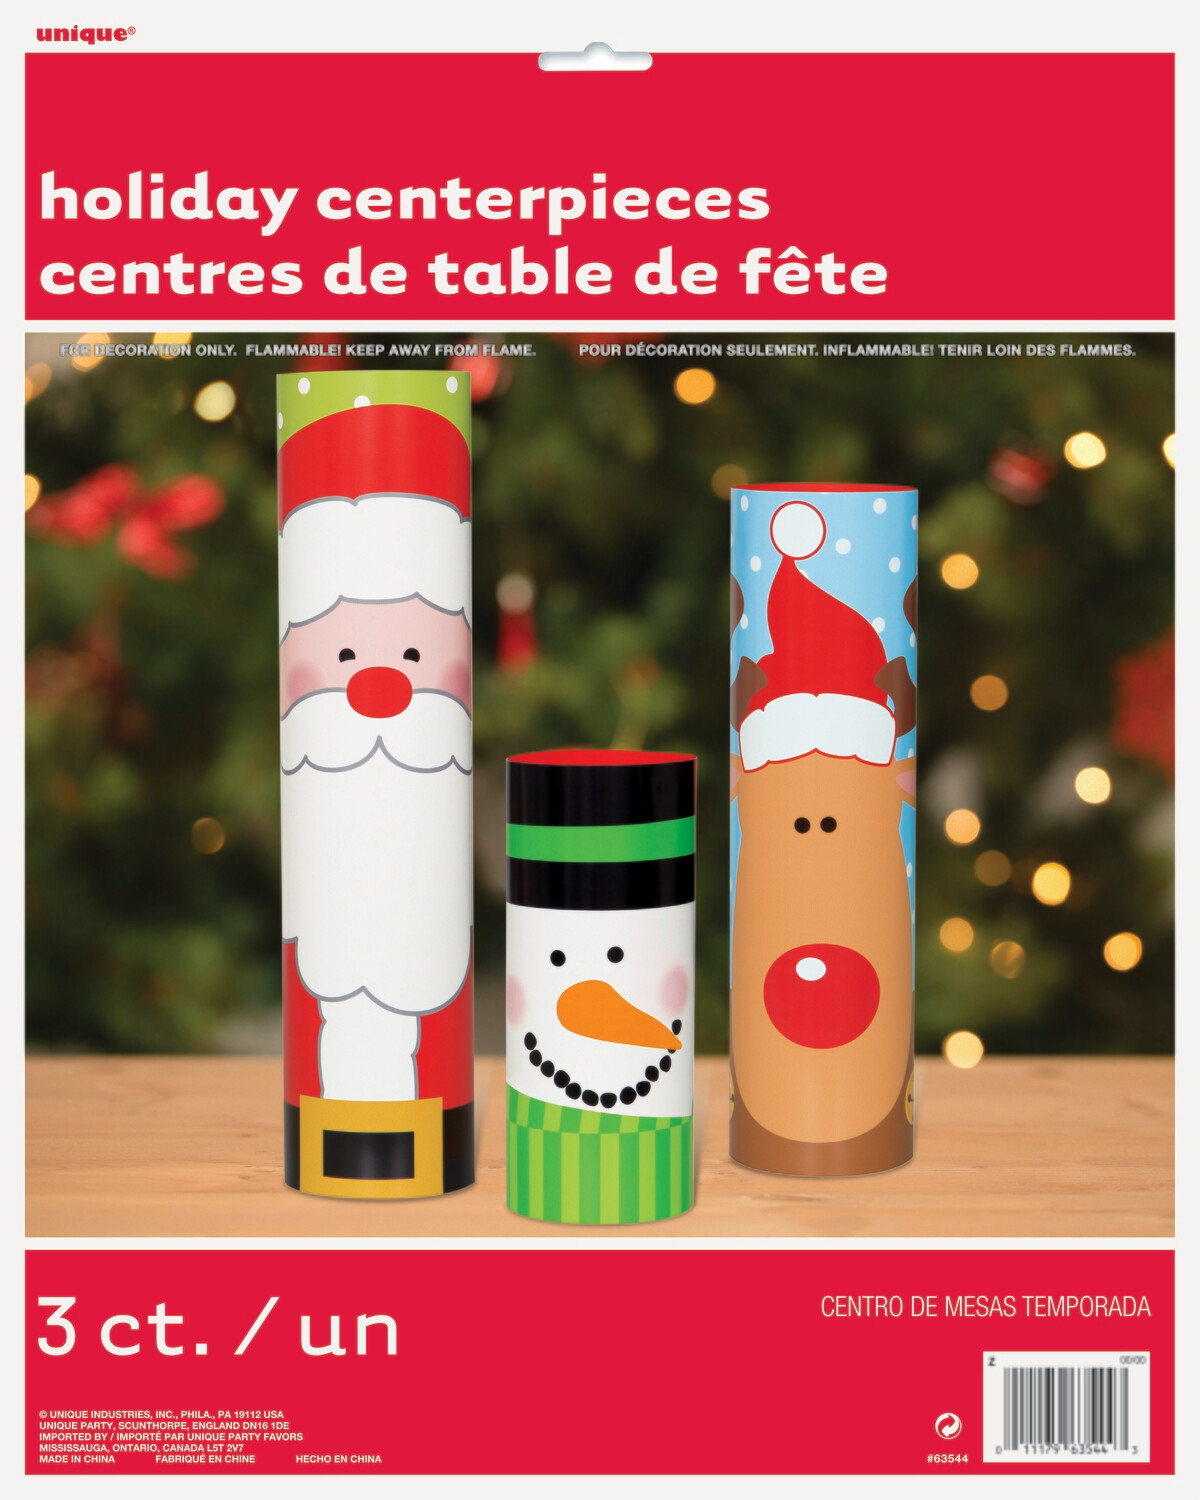 HoHoHo Christmas Cylinder Centerpiece Containers